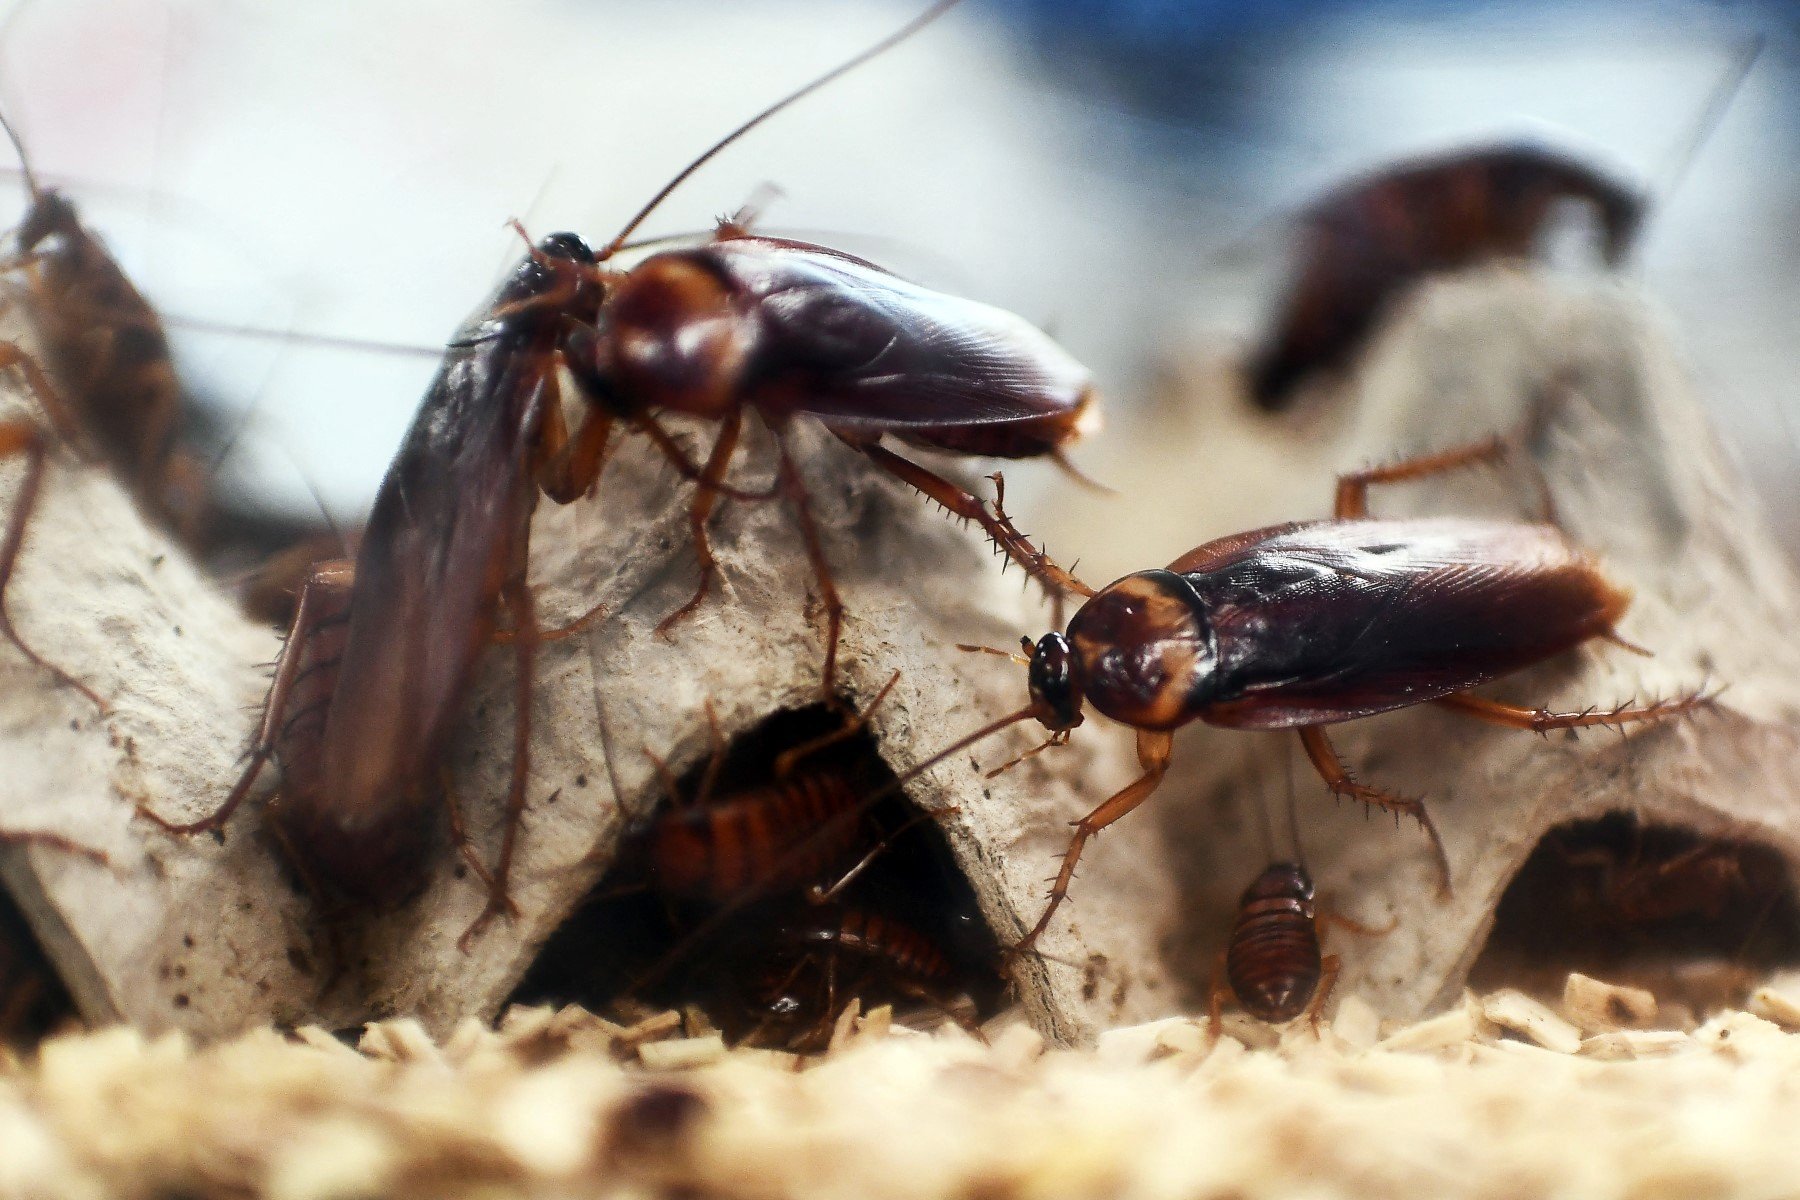 'Mutant cockroaches': Why Spain's rising temperatures make them multiply thumbnail